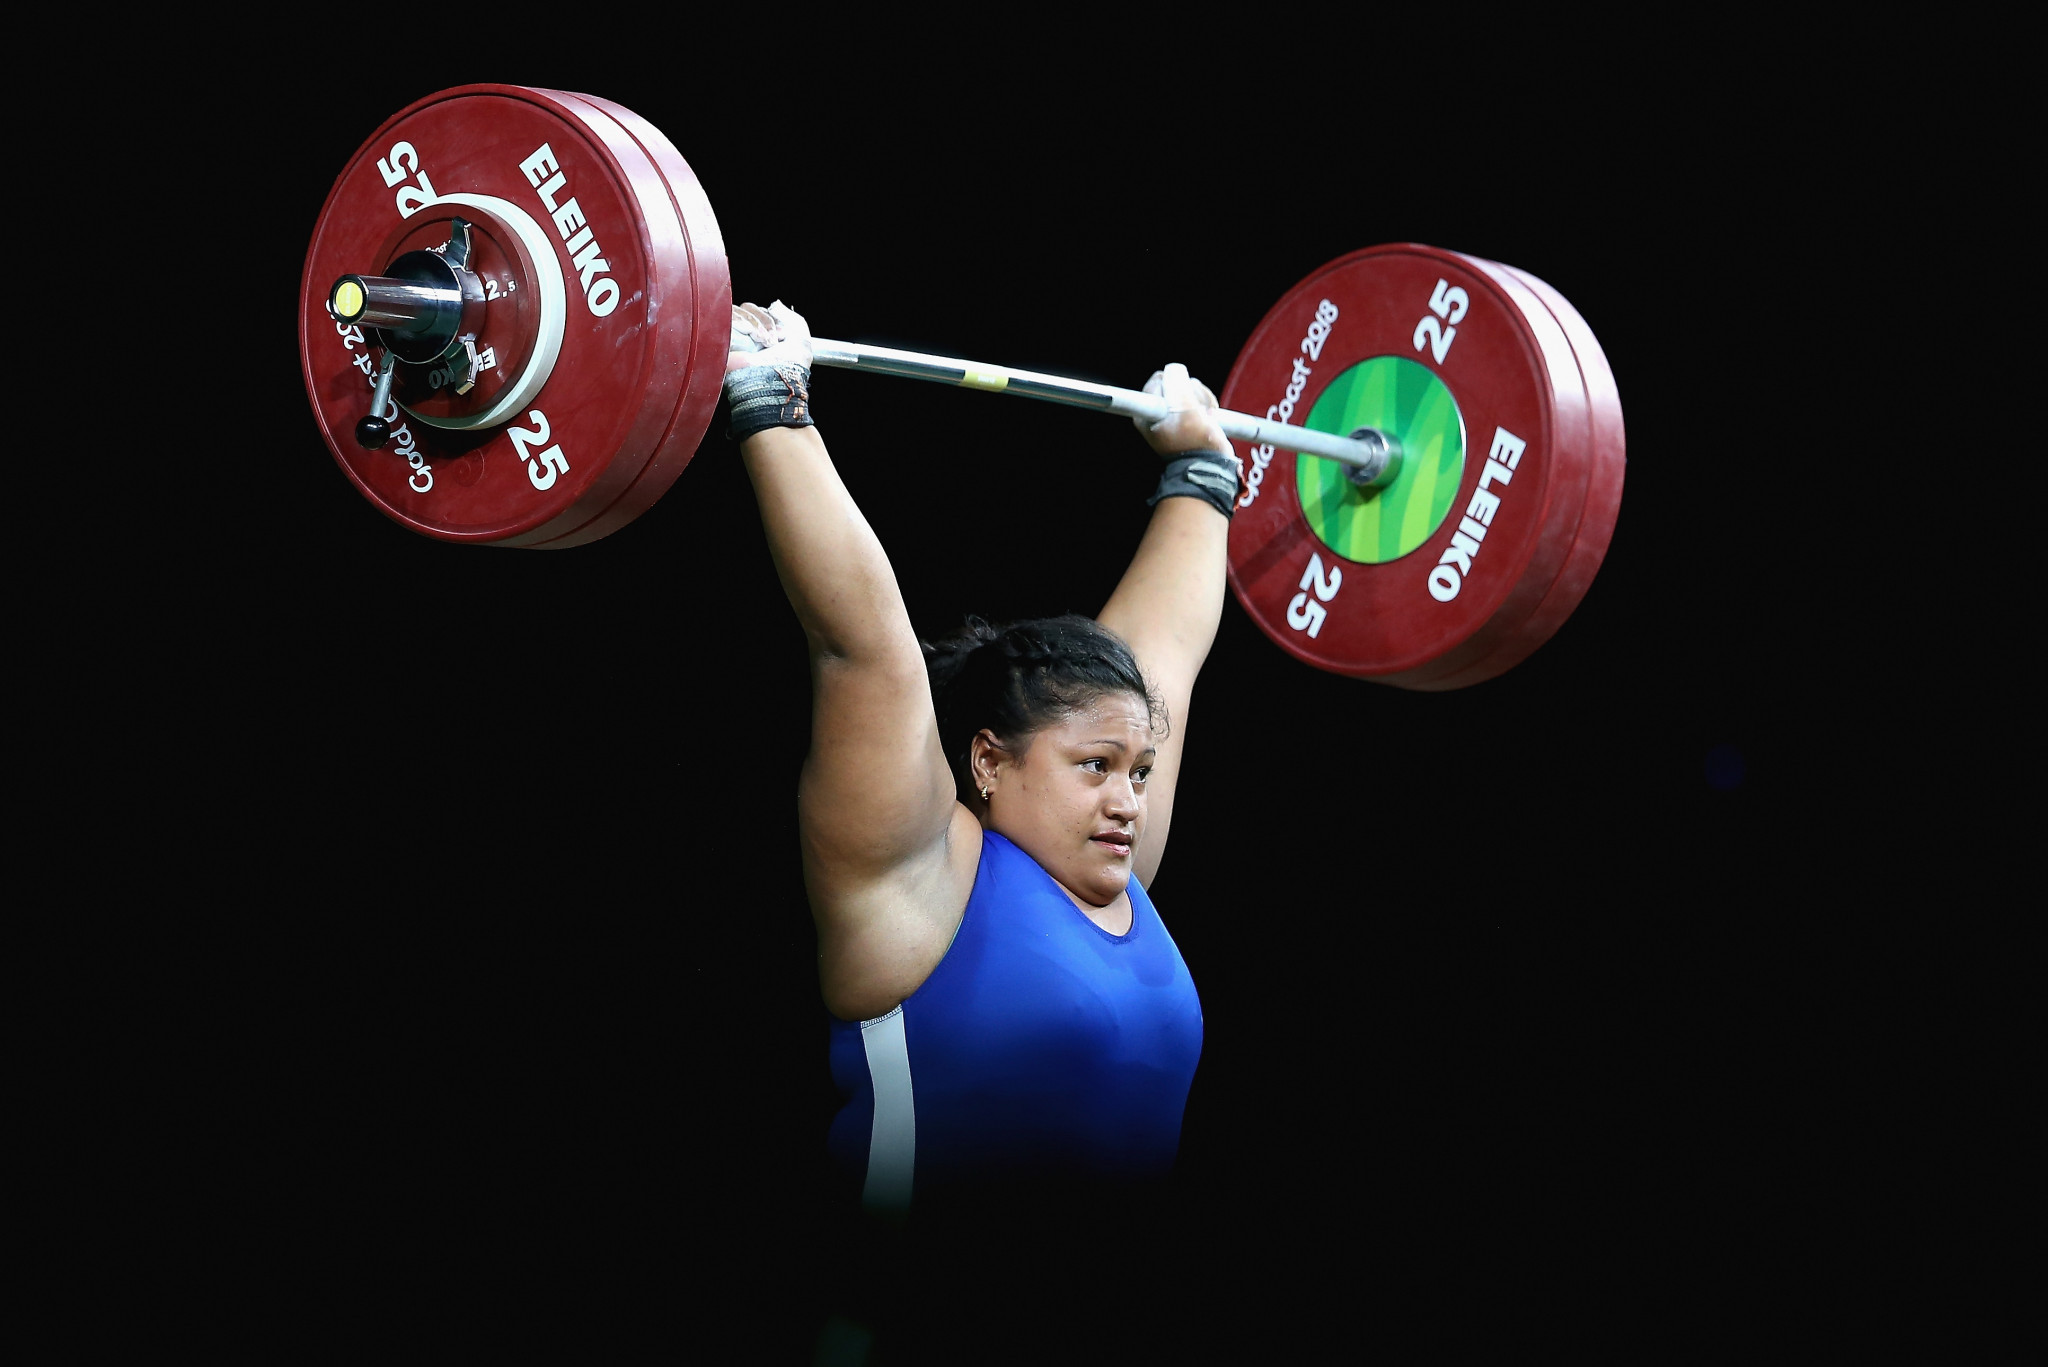 Samoa’s Feagaiga Stowers capitalised on transgender athlete Laurel Hubbard’s withdrawal from the women’s over 90 kilograms weightlifting event to claim victory ©Getty Images